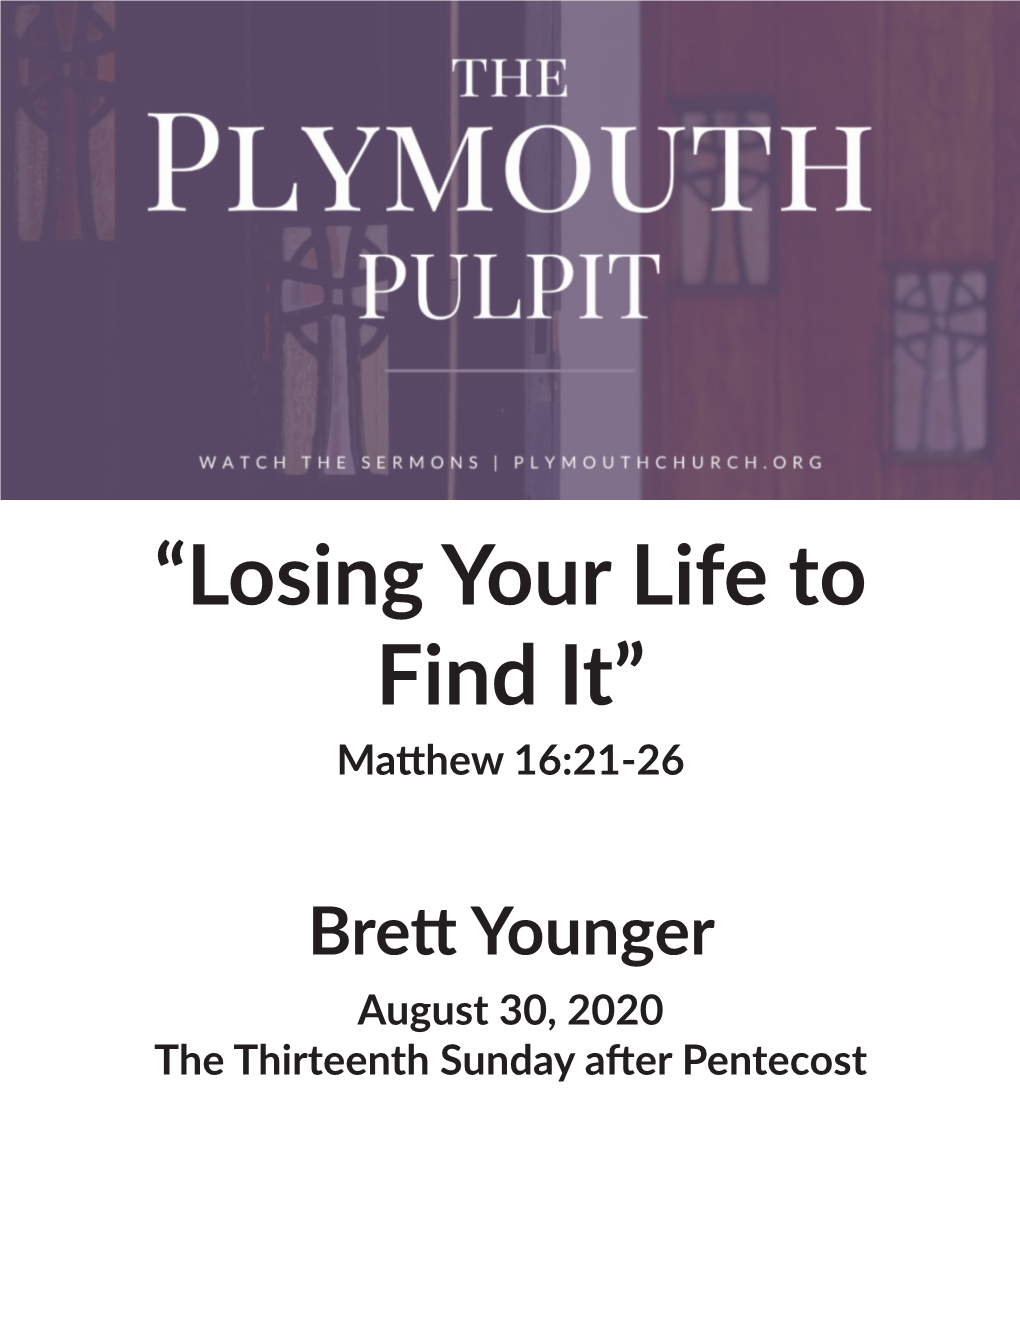 “Losing Your Life to Find It” Matthew 16:21-26